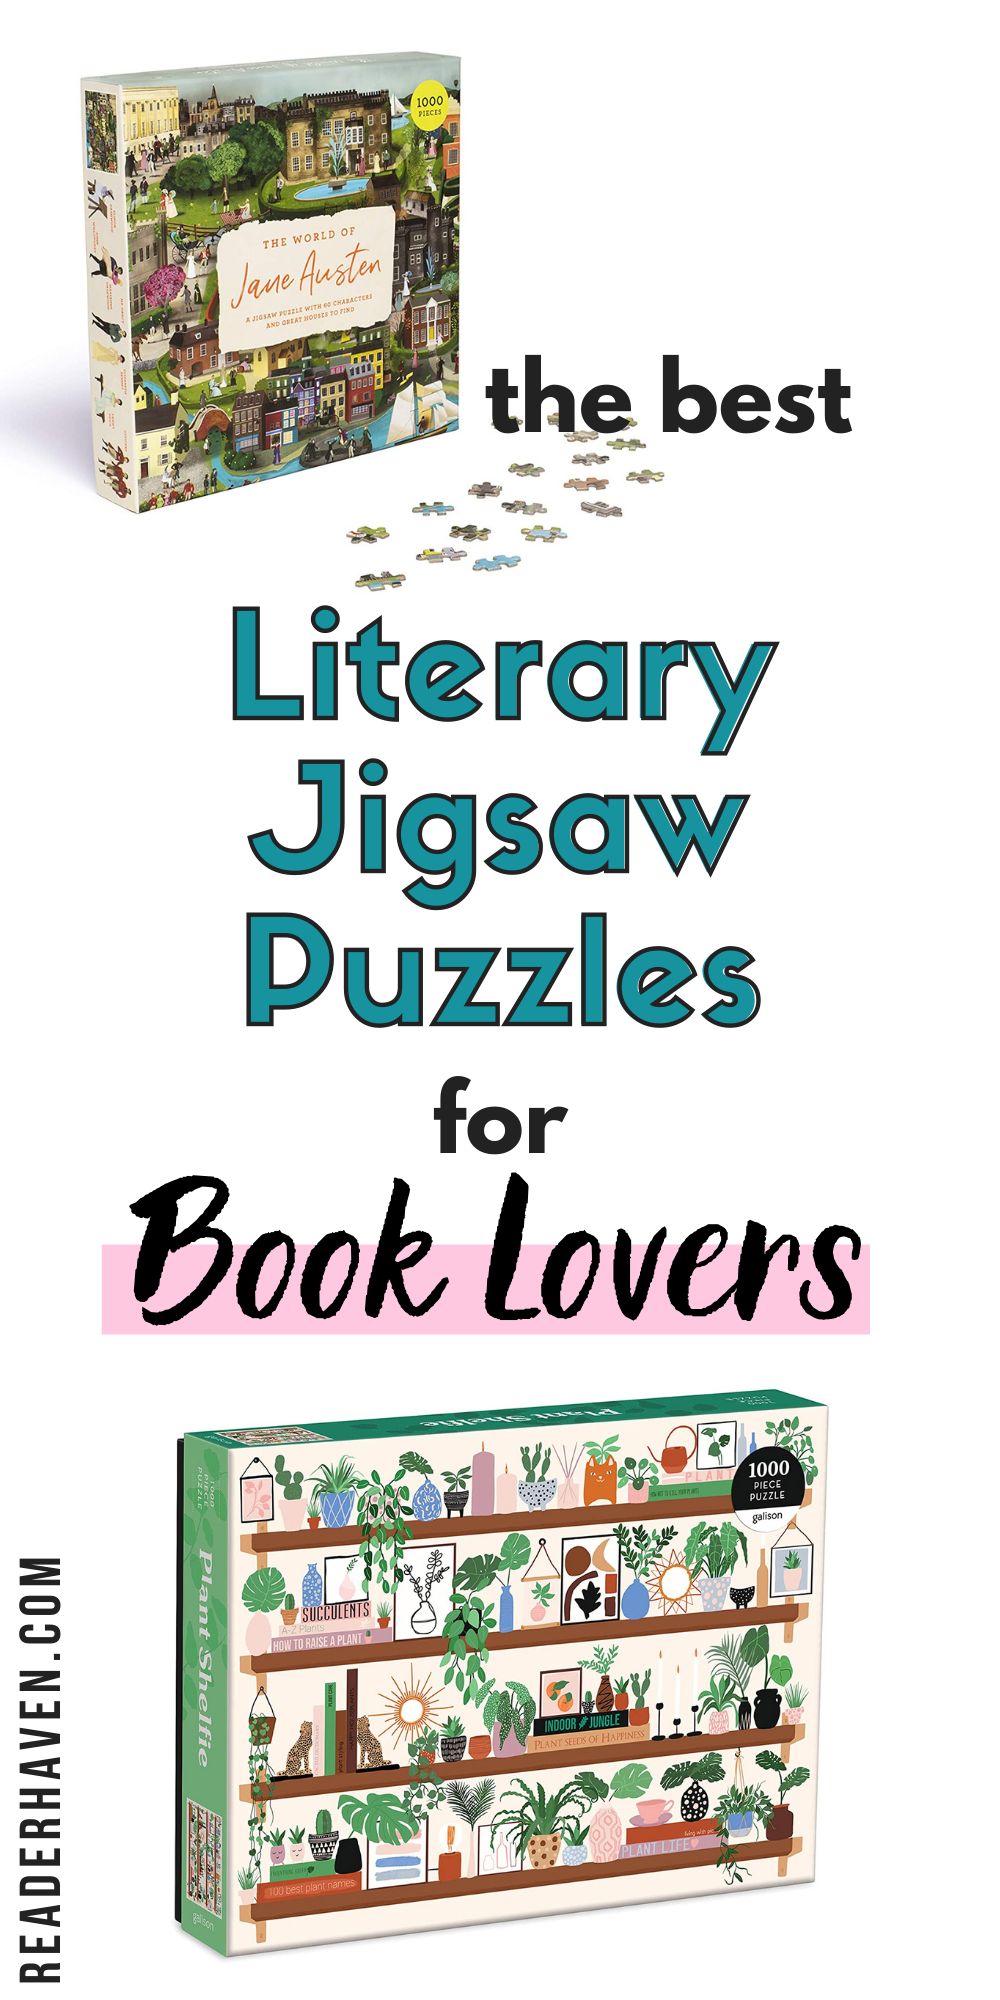 The Best Literary Jigsaw Puzzles for Book Lovers